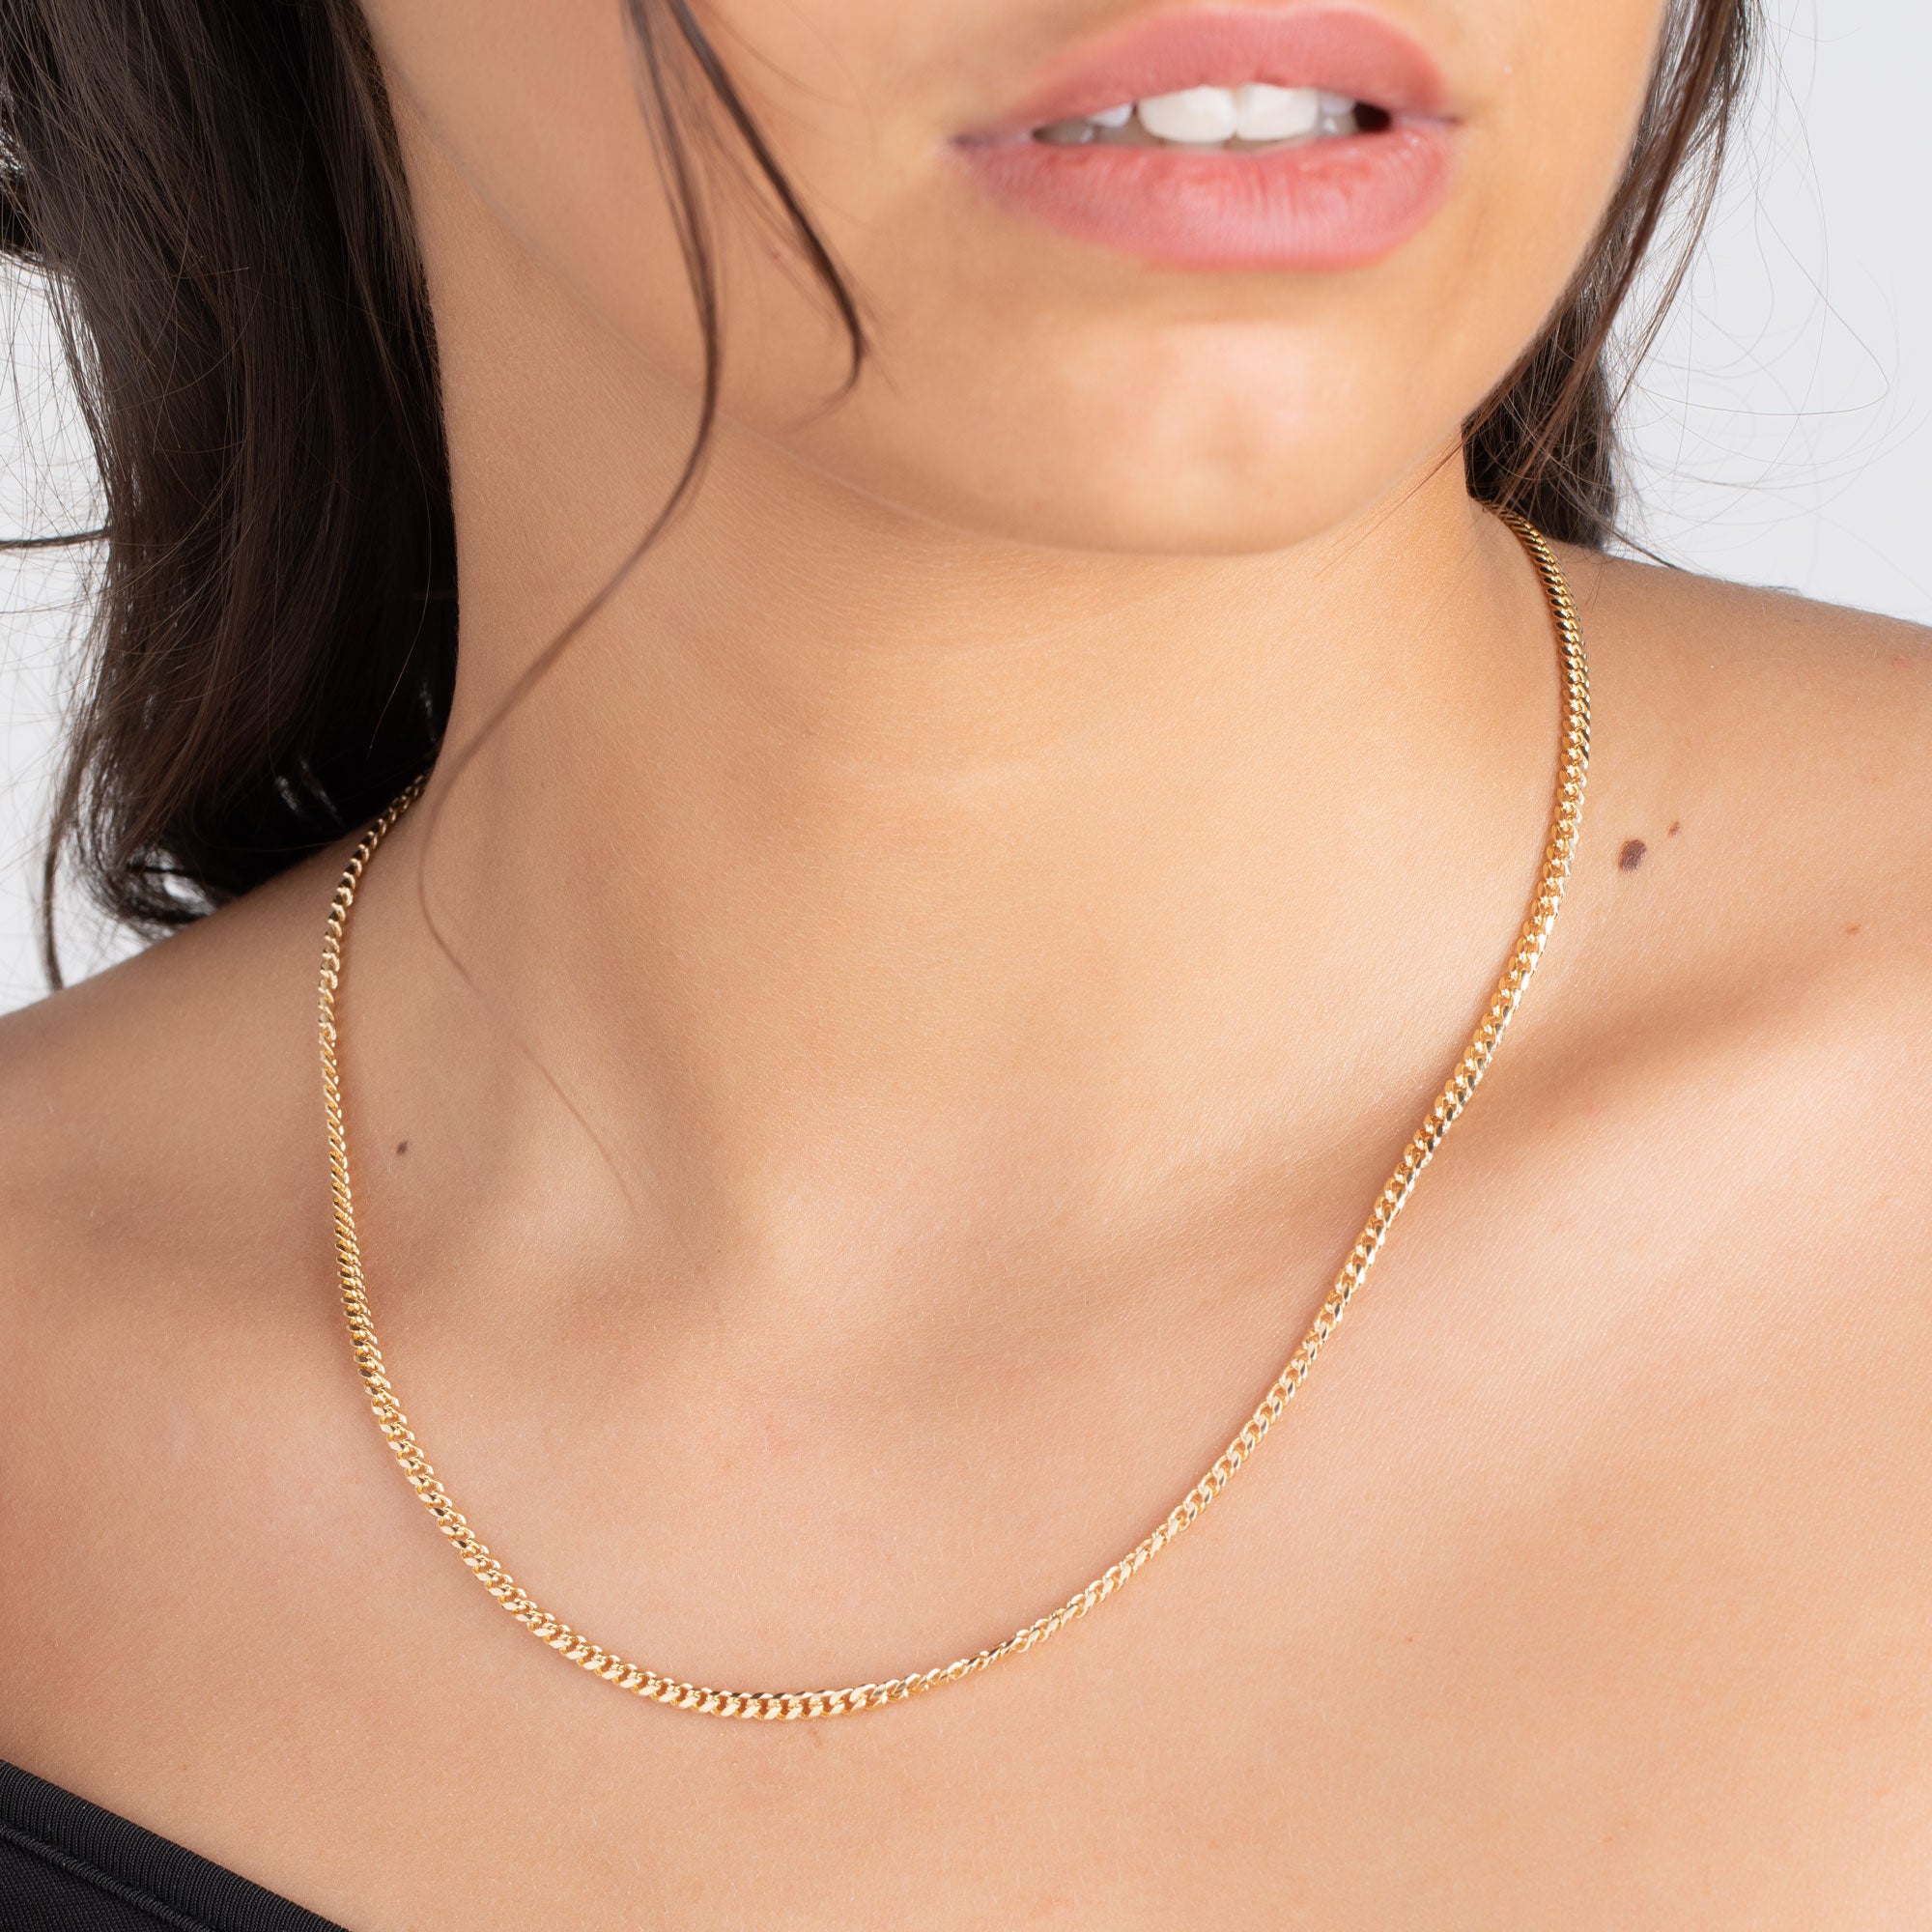 18k Gold Plated Miami Cuban Necklace 3mm Thick